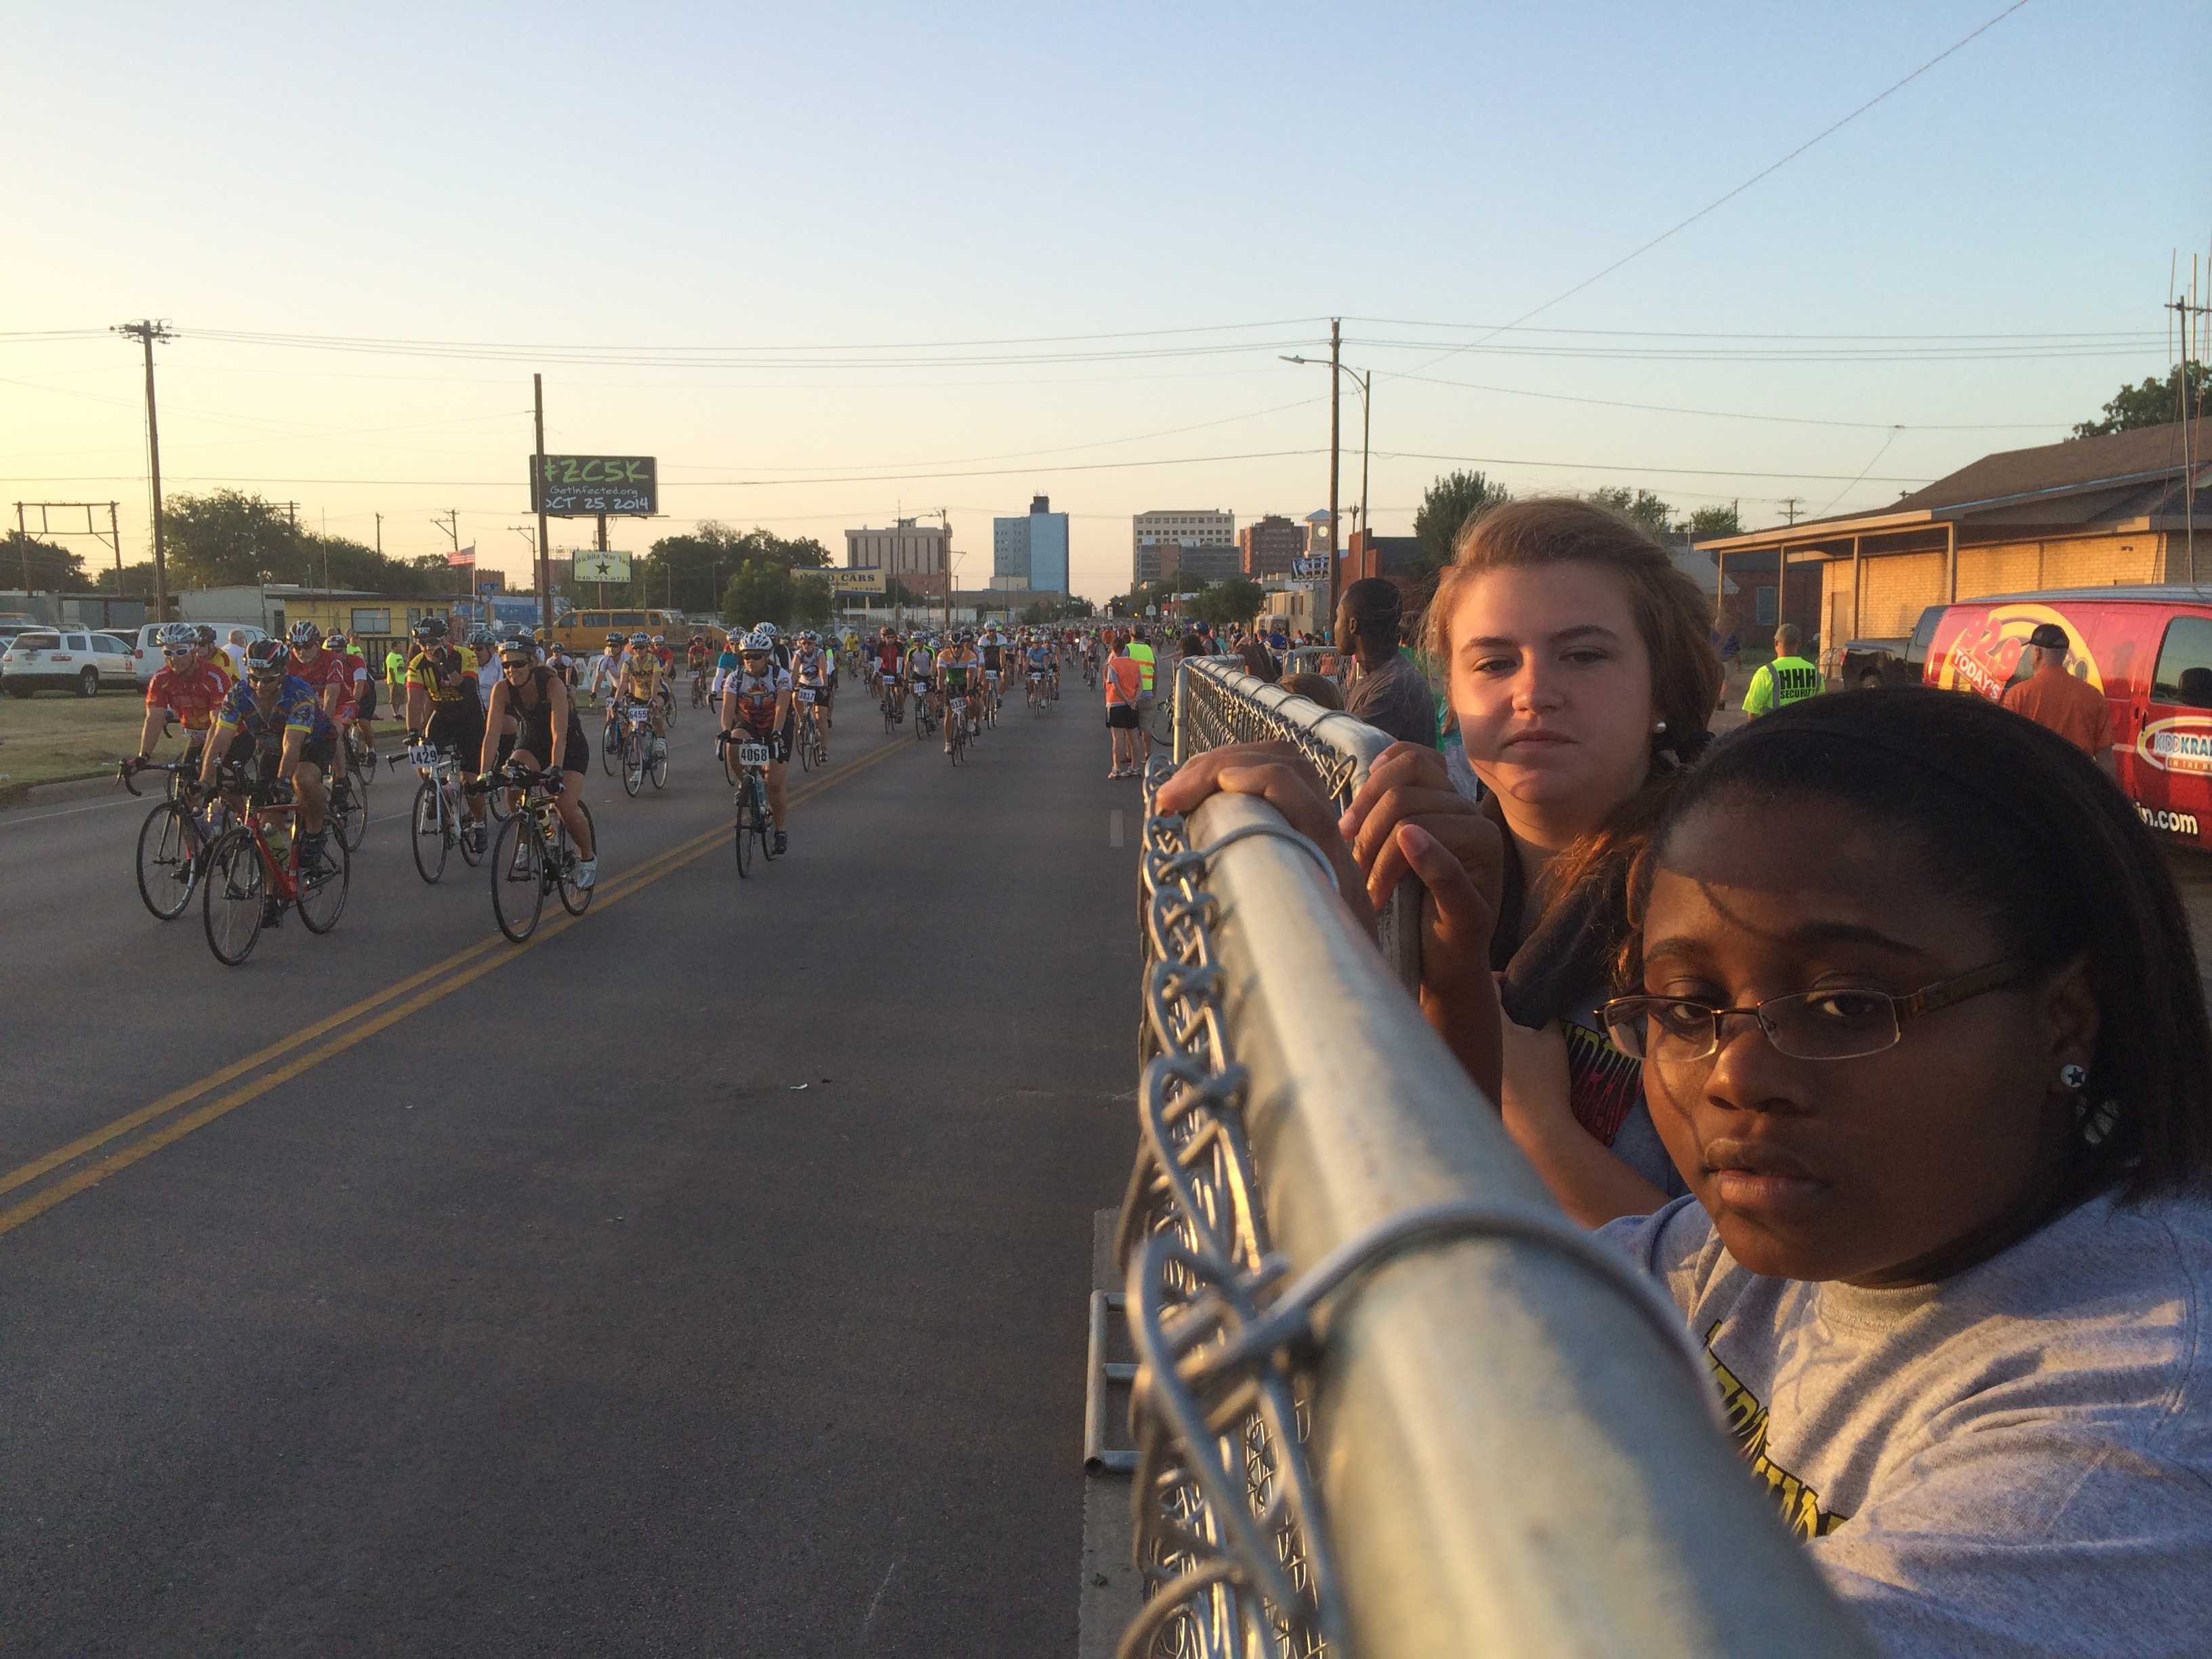 Macy Pritchett, education sophomore, and Talia Harris, mass communication sophomore, watch the endless stream of racers leave the starting gates as they wait cross the road to deflate and transfer "Pyro Pete" to the Hell's Gate rest stop in Burkburnett. Photo by Ethan Metcalf